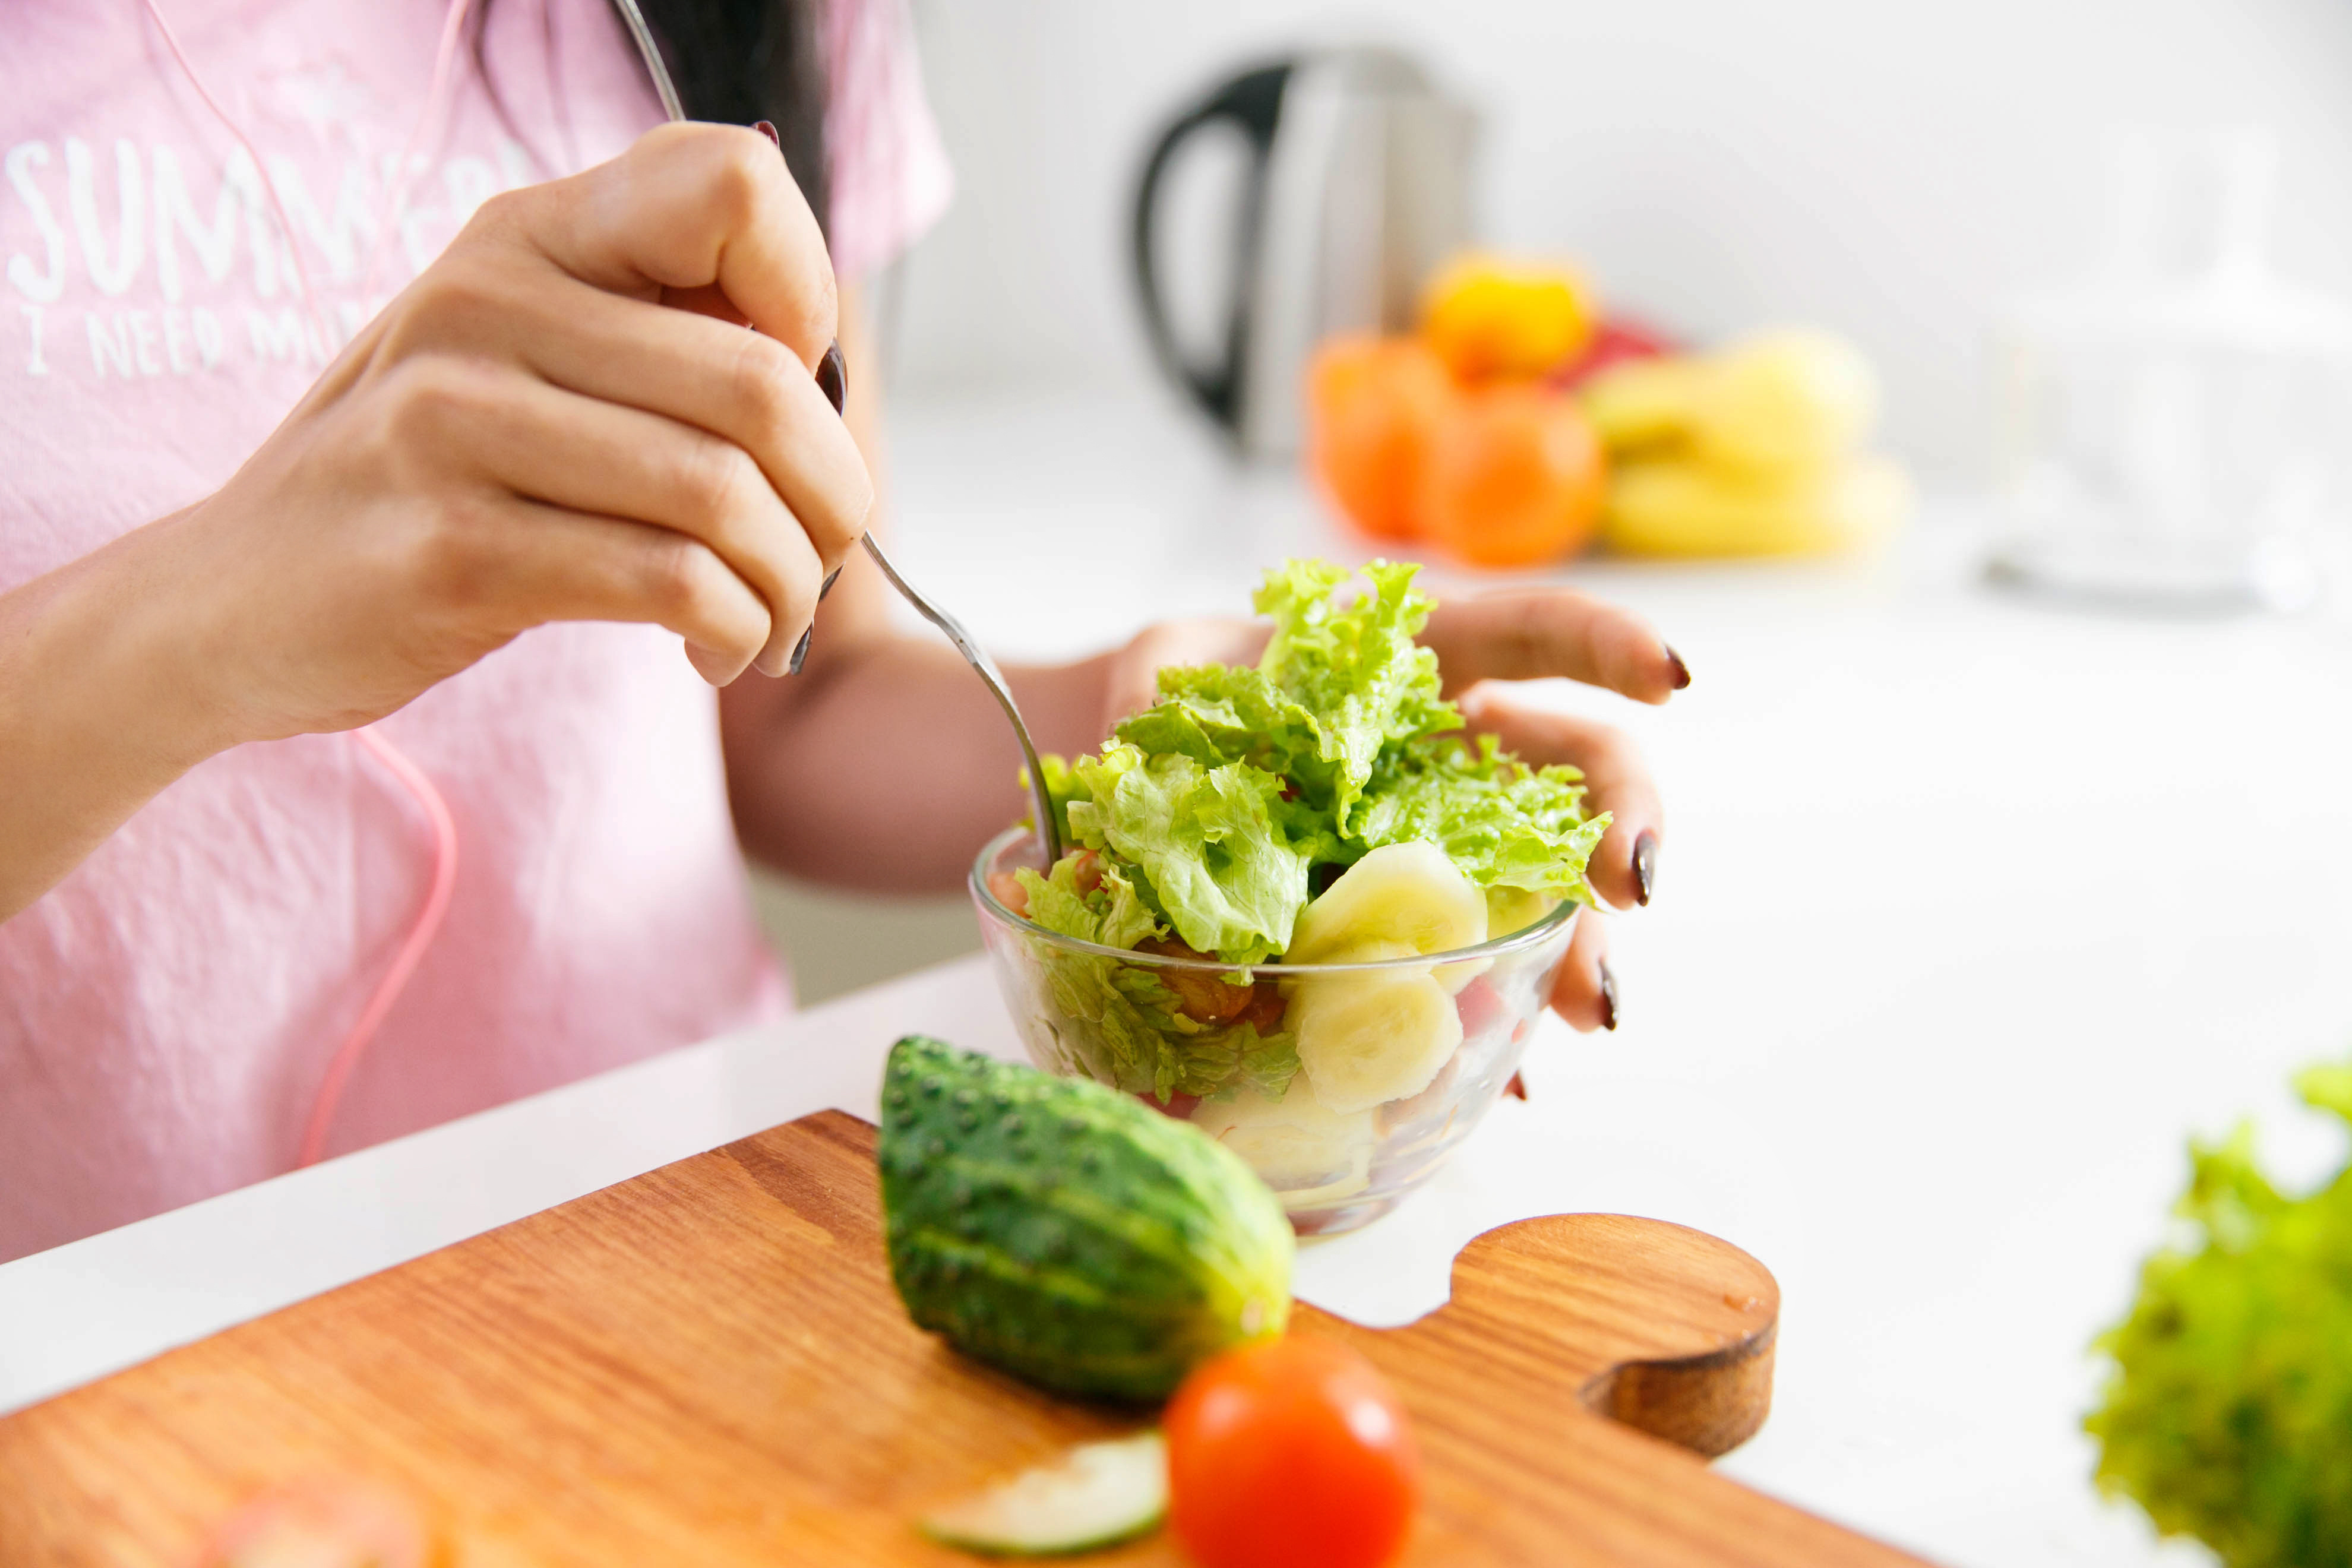 Close-up of woman's hands mixing salad in the kitchen